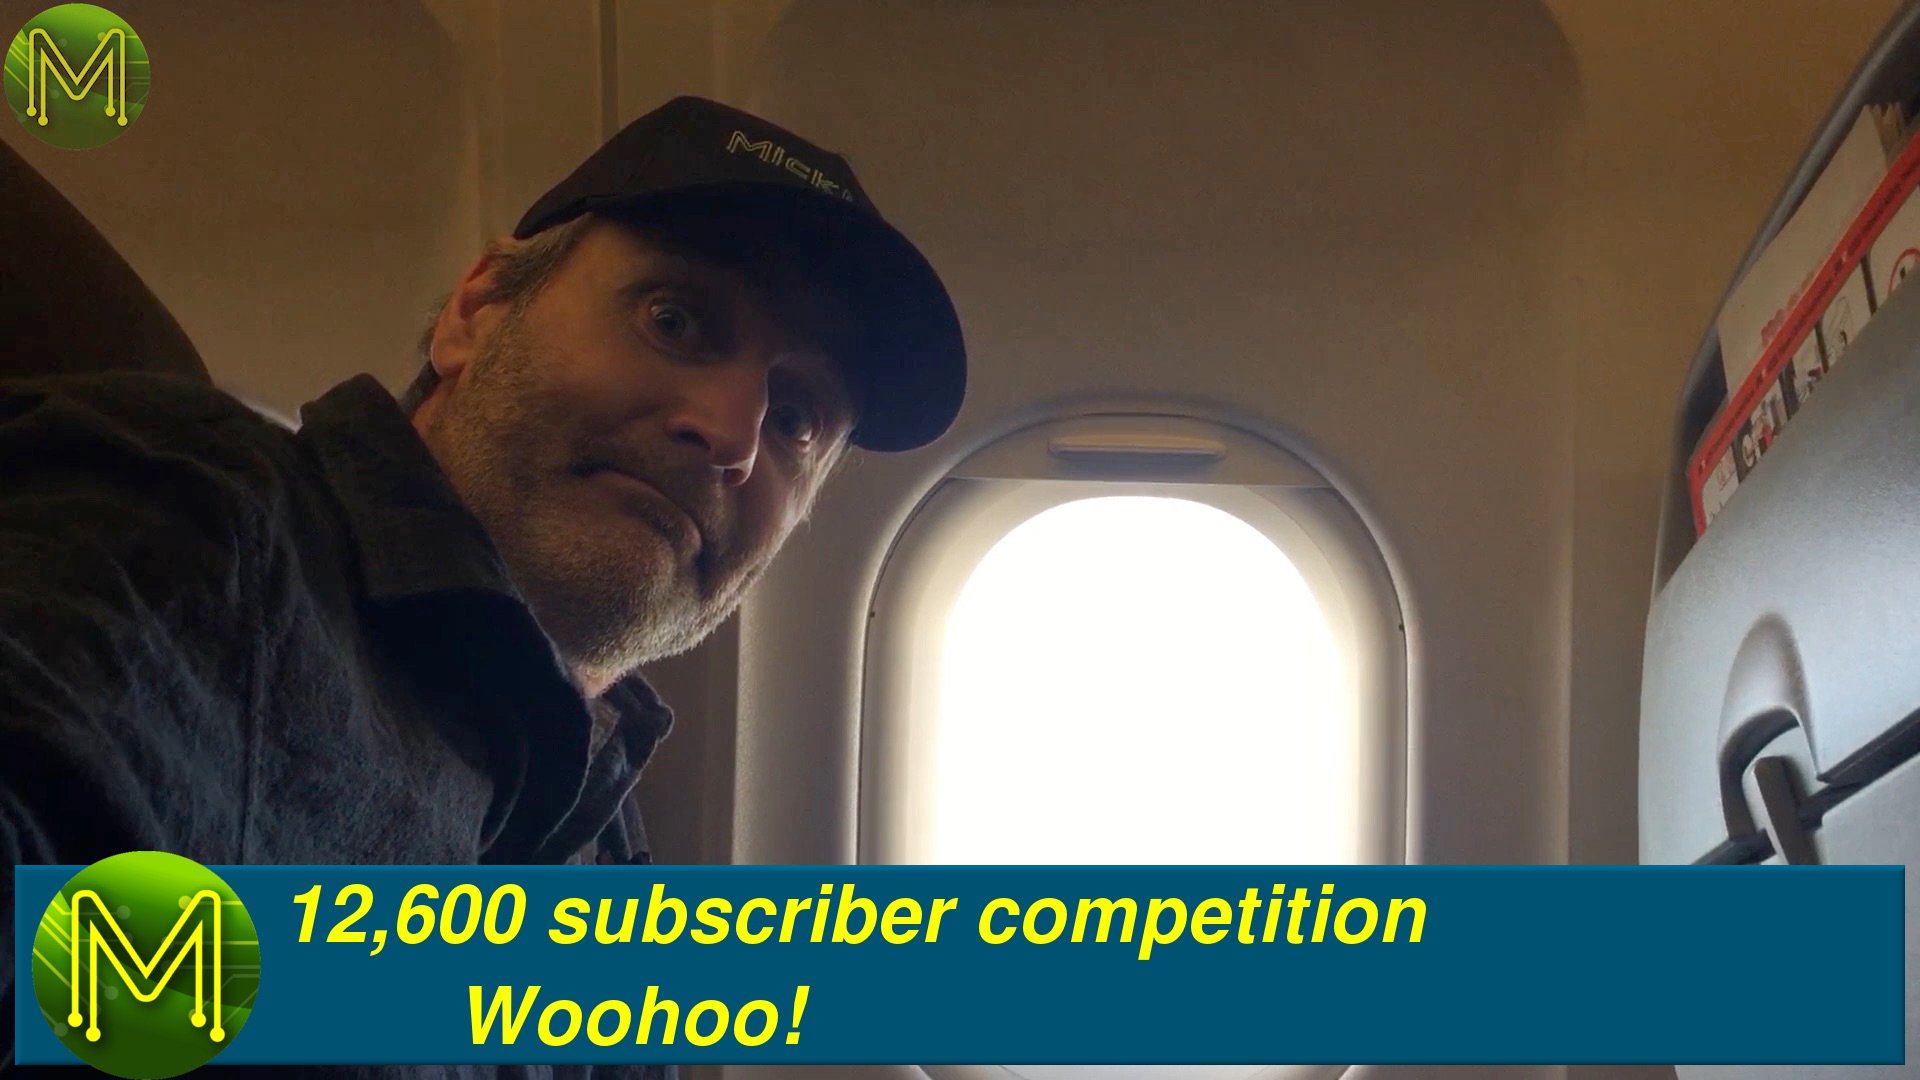 12,600 subscriber competition winner!